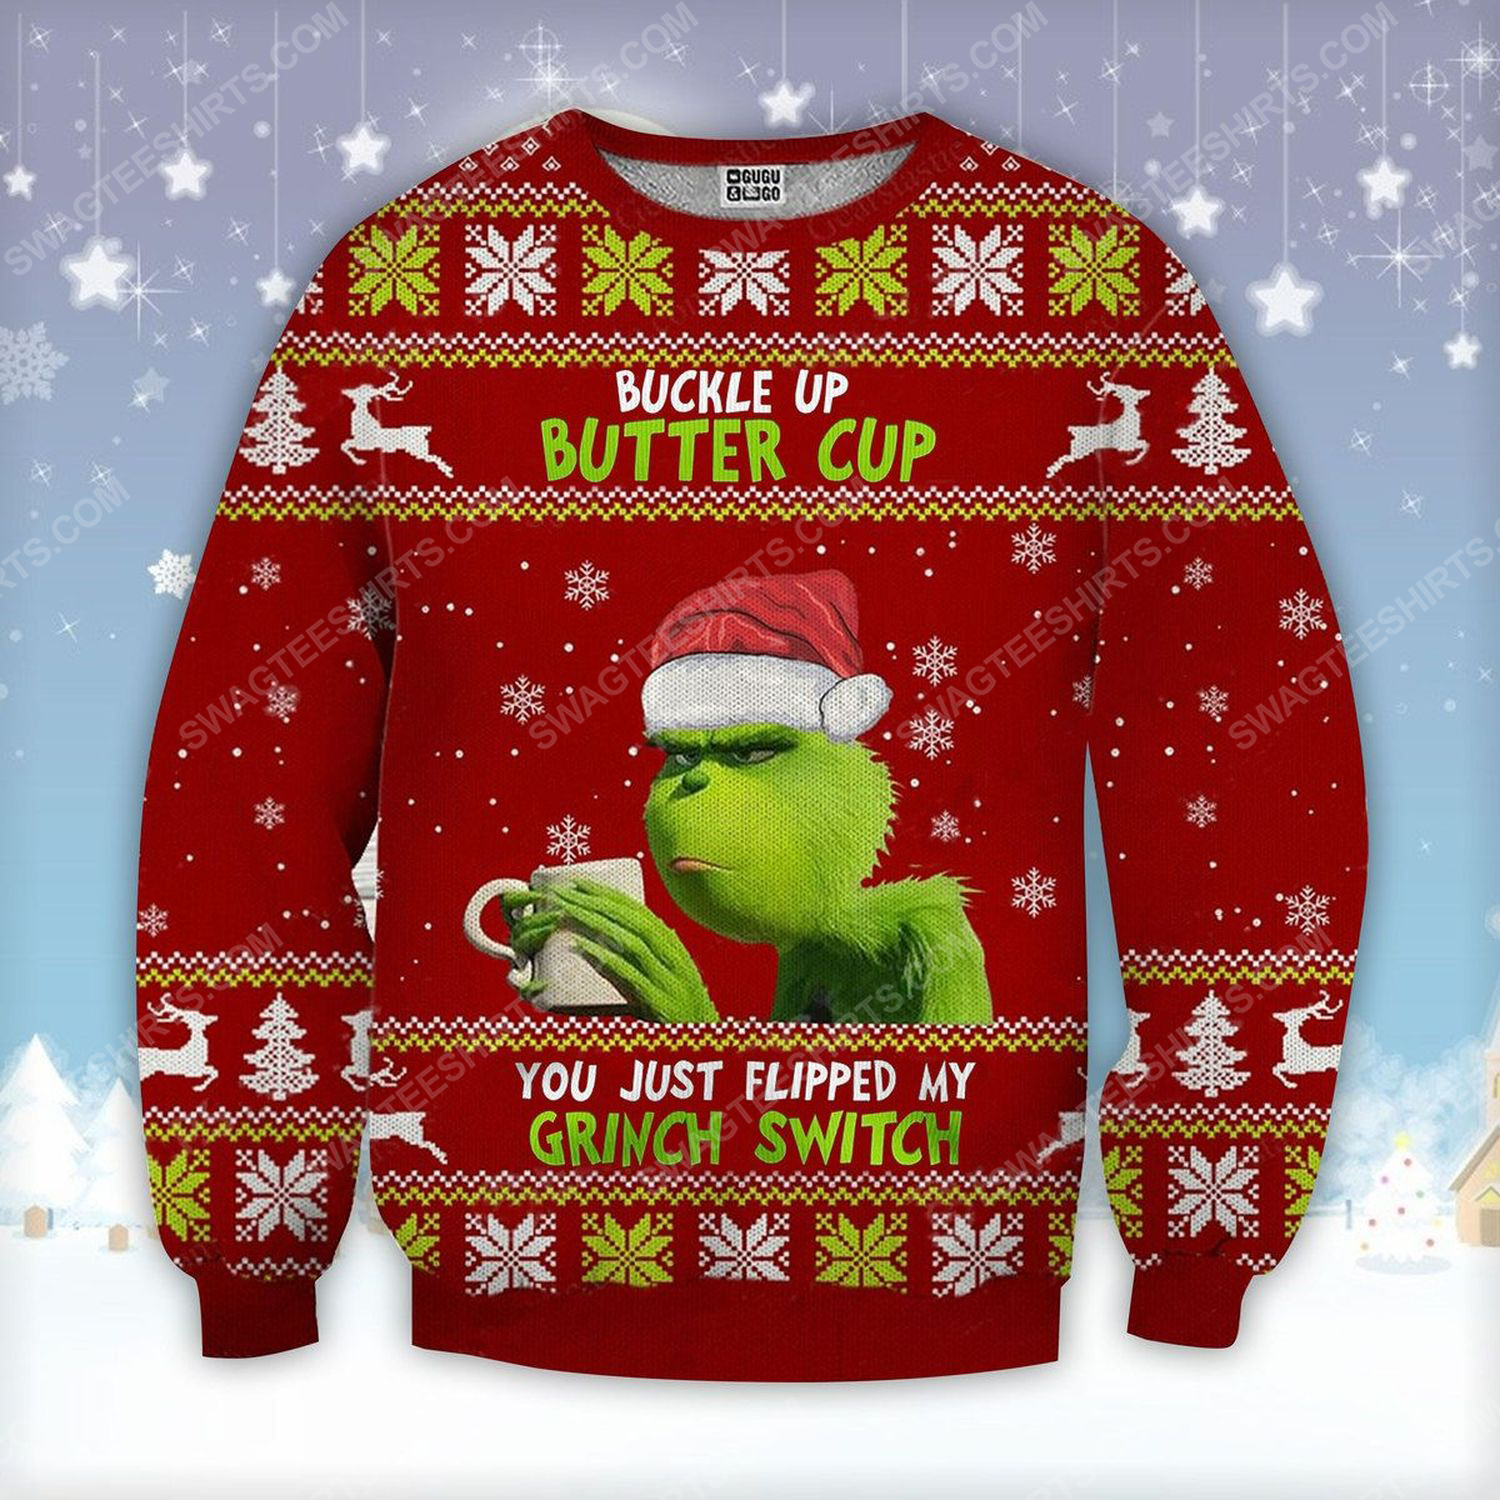 Buckle up buttercup you just flipped my grinch switch ugly christmas sweater - Copy